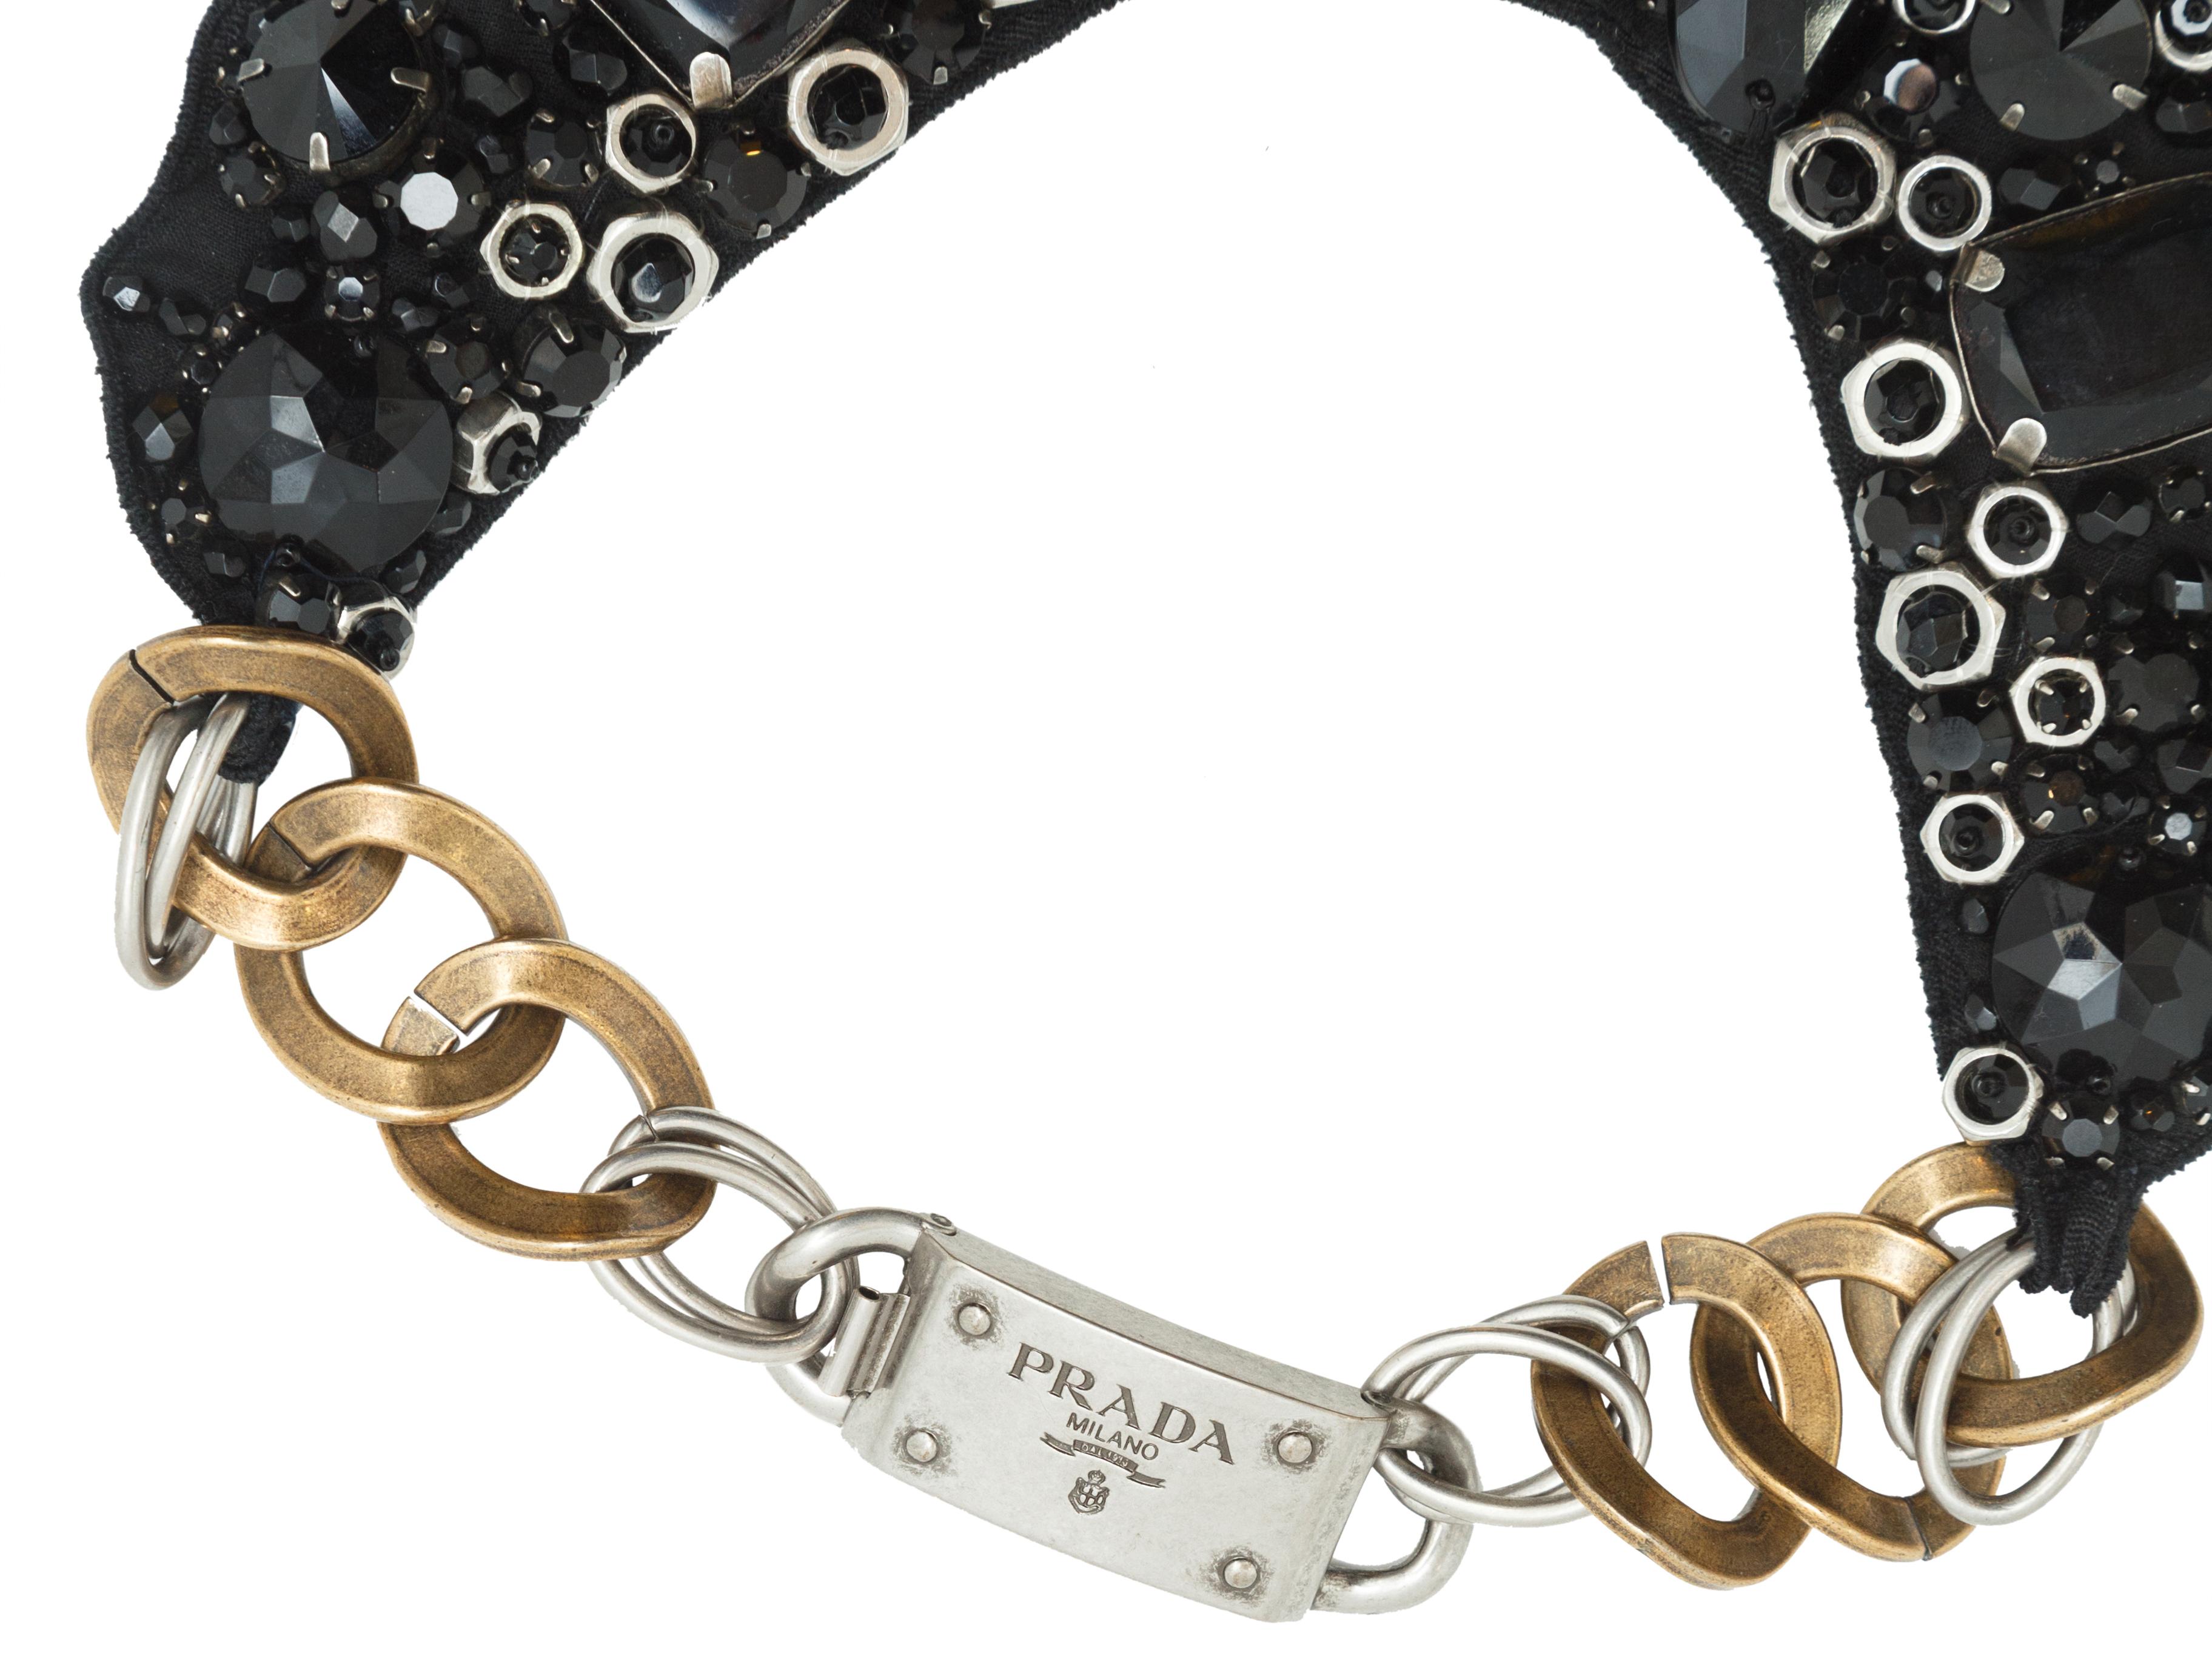 Product details:  Black beaded bib necklace by Prada.  Chunky chain with logo buckle.  Goldtone and silvertone hardware.  18.5